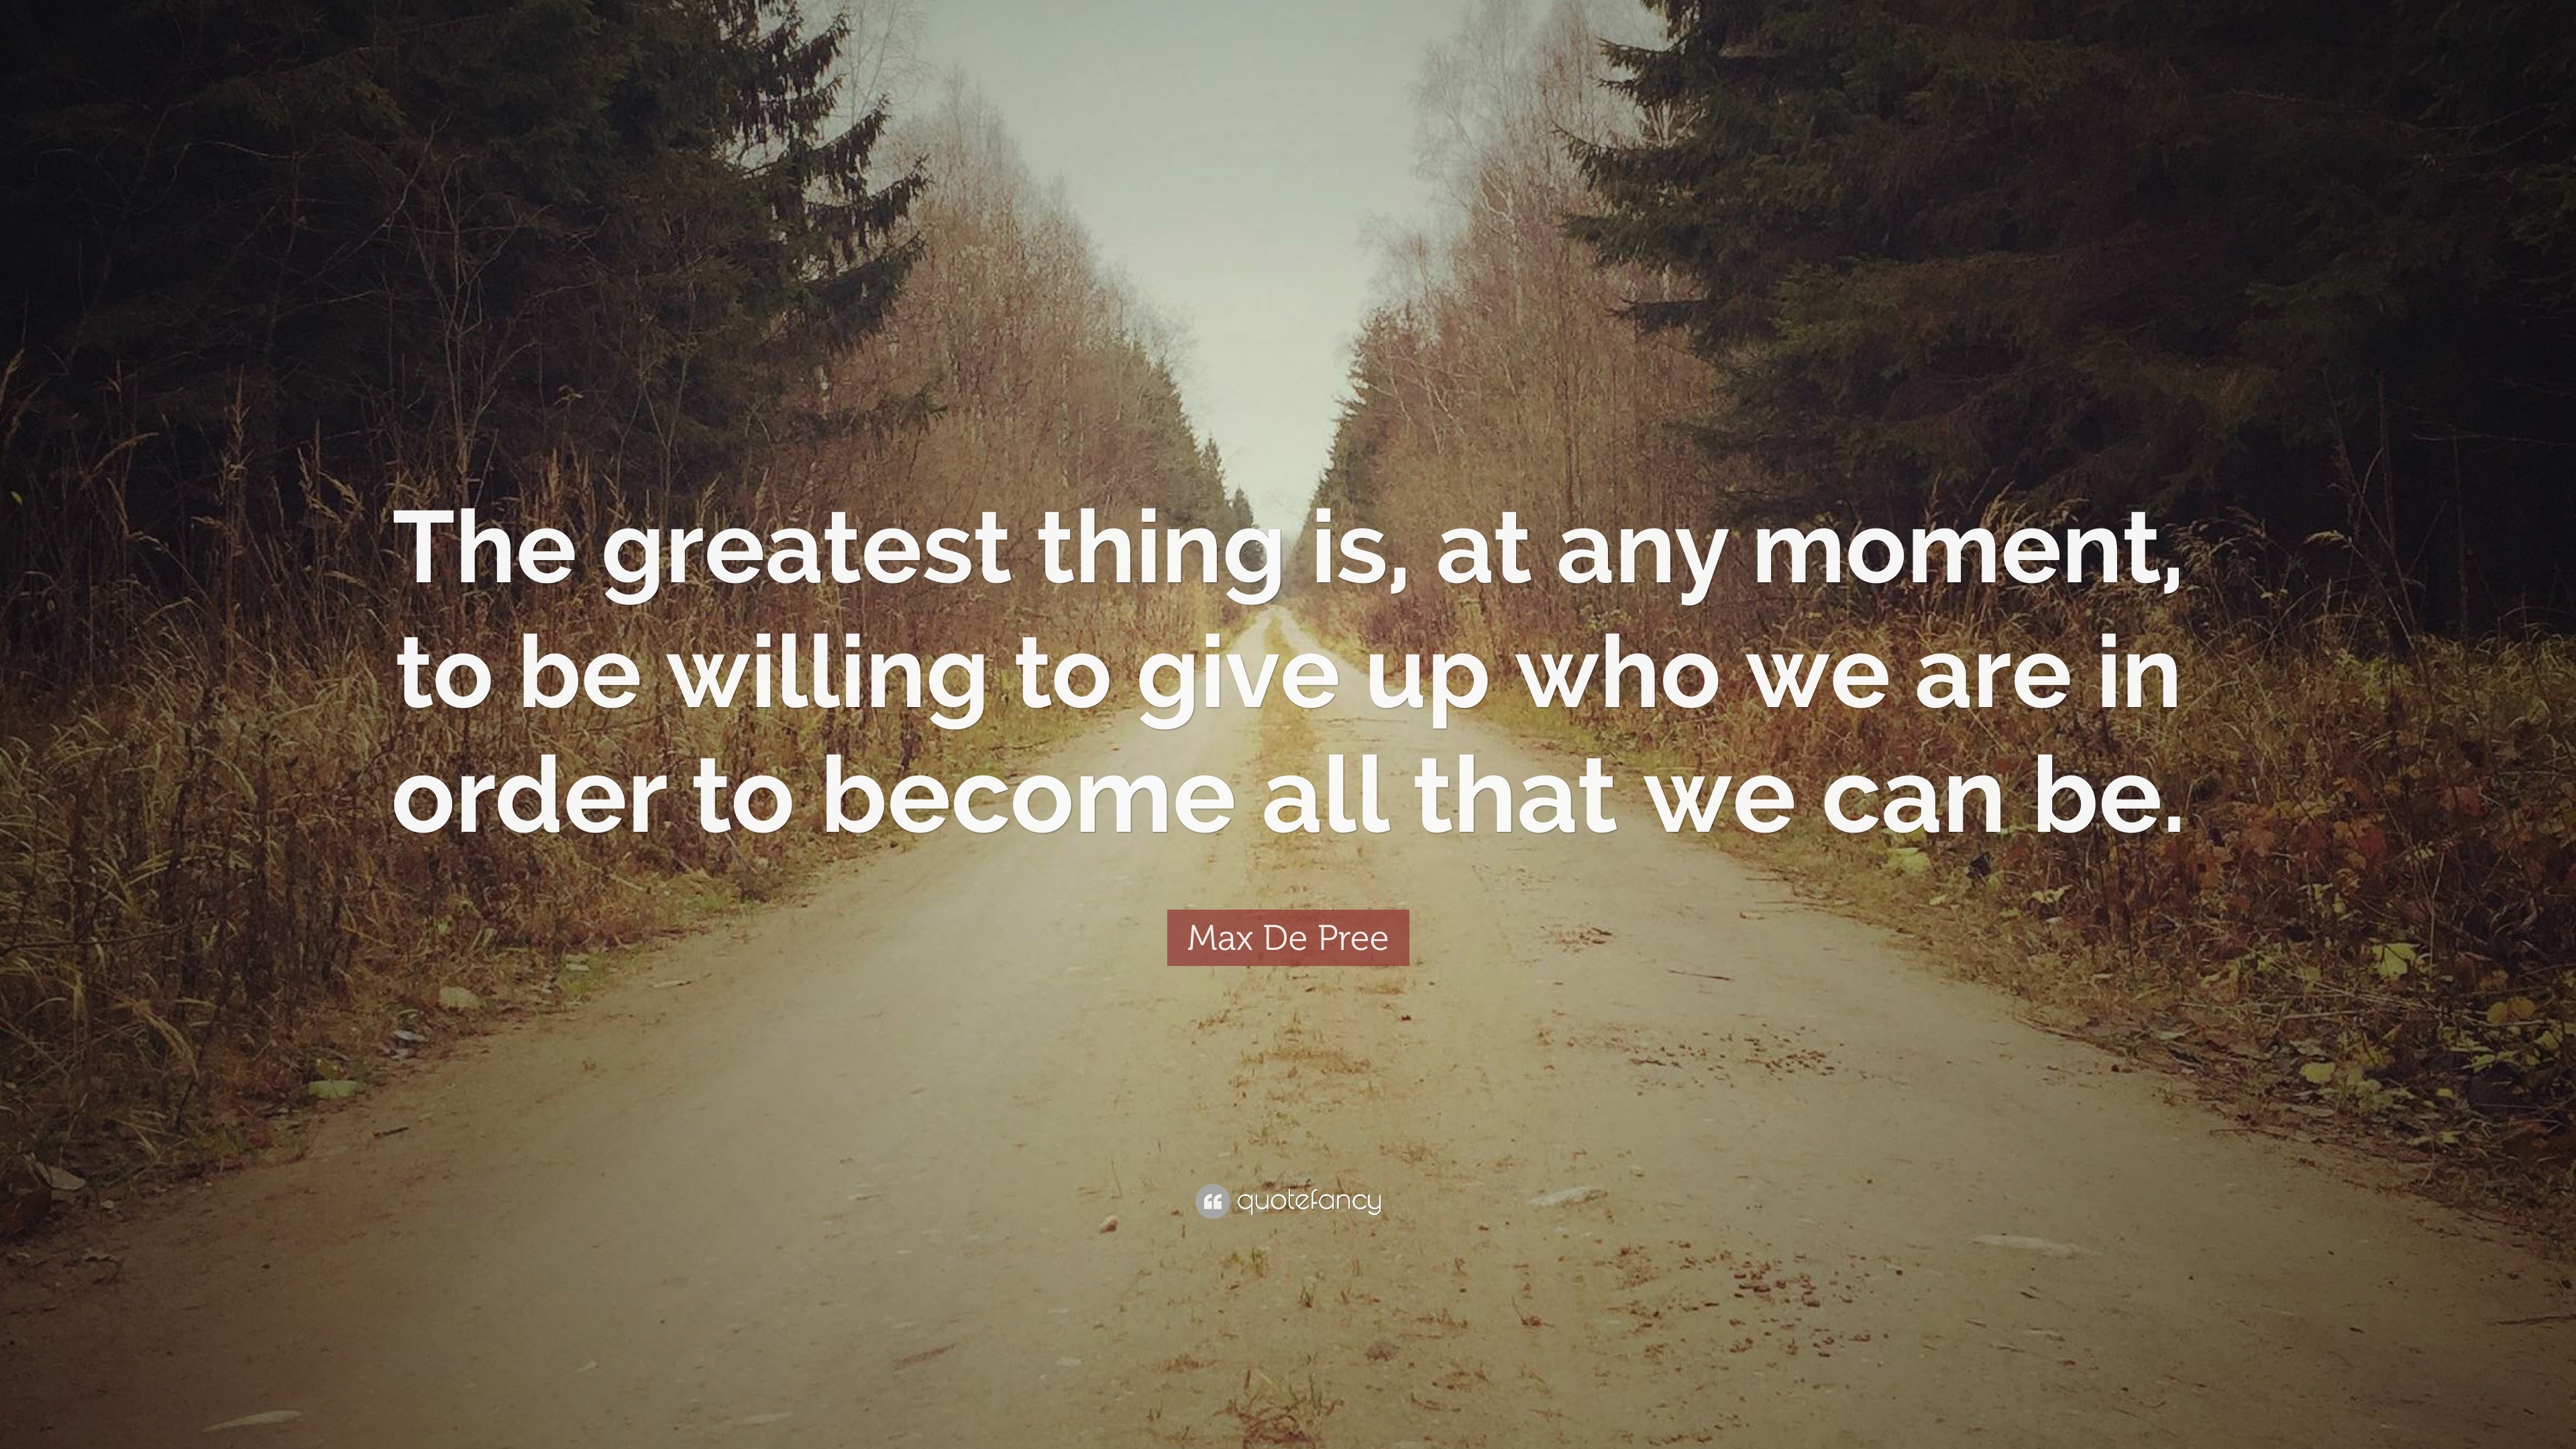 Max De Pree Quote: “The greatest thing is, at any moment, to be willing ...